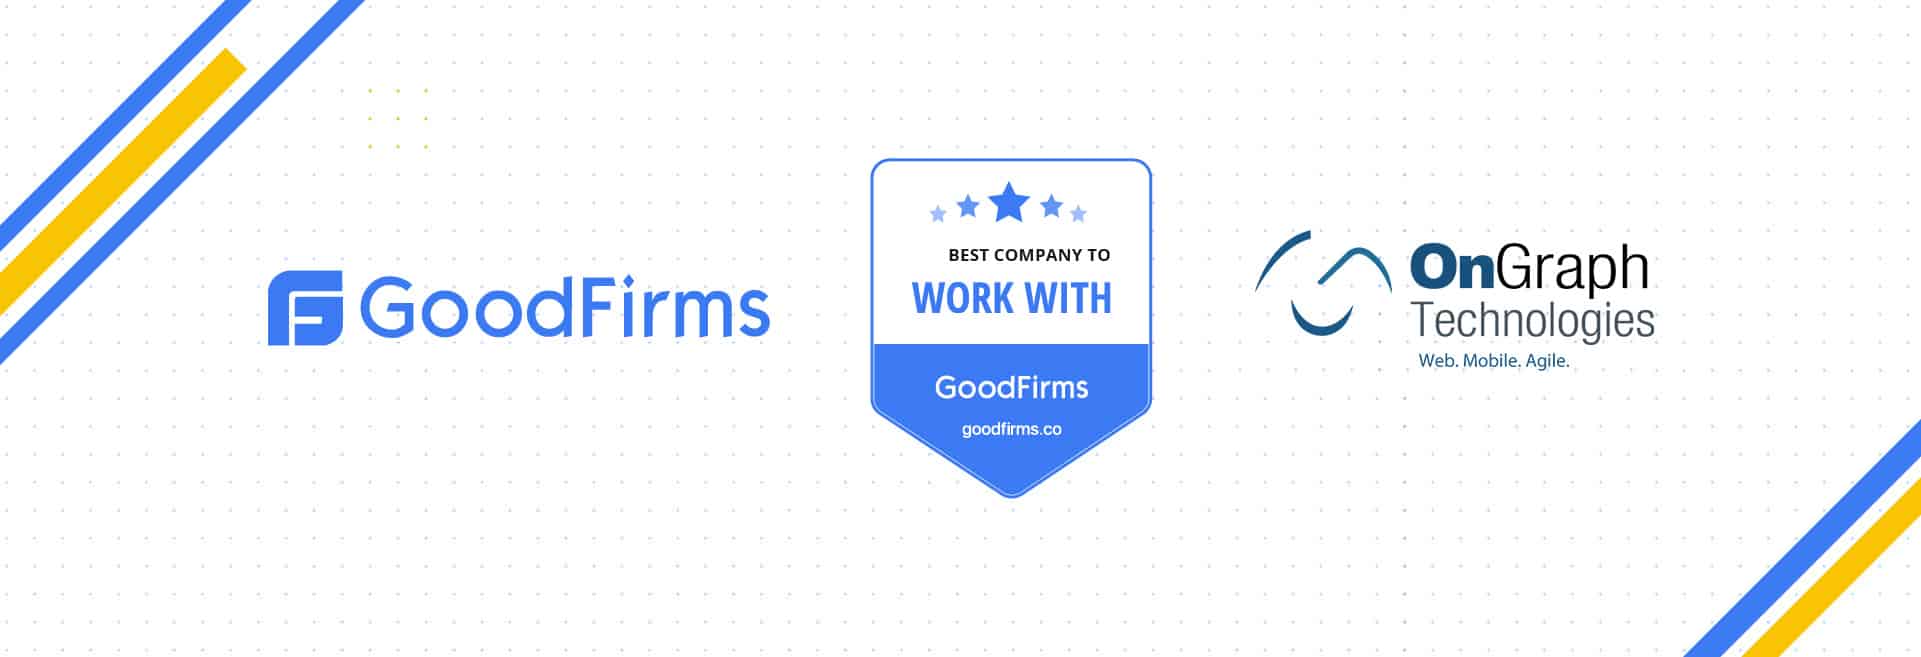 Goodfirms with OnGraph